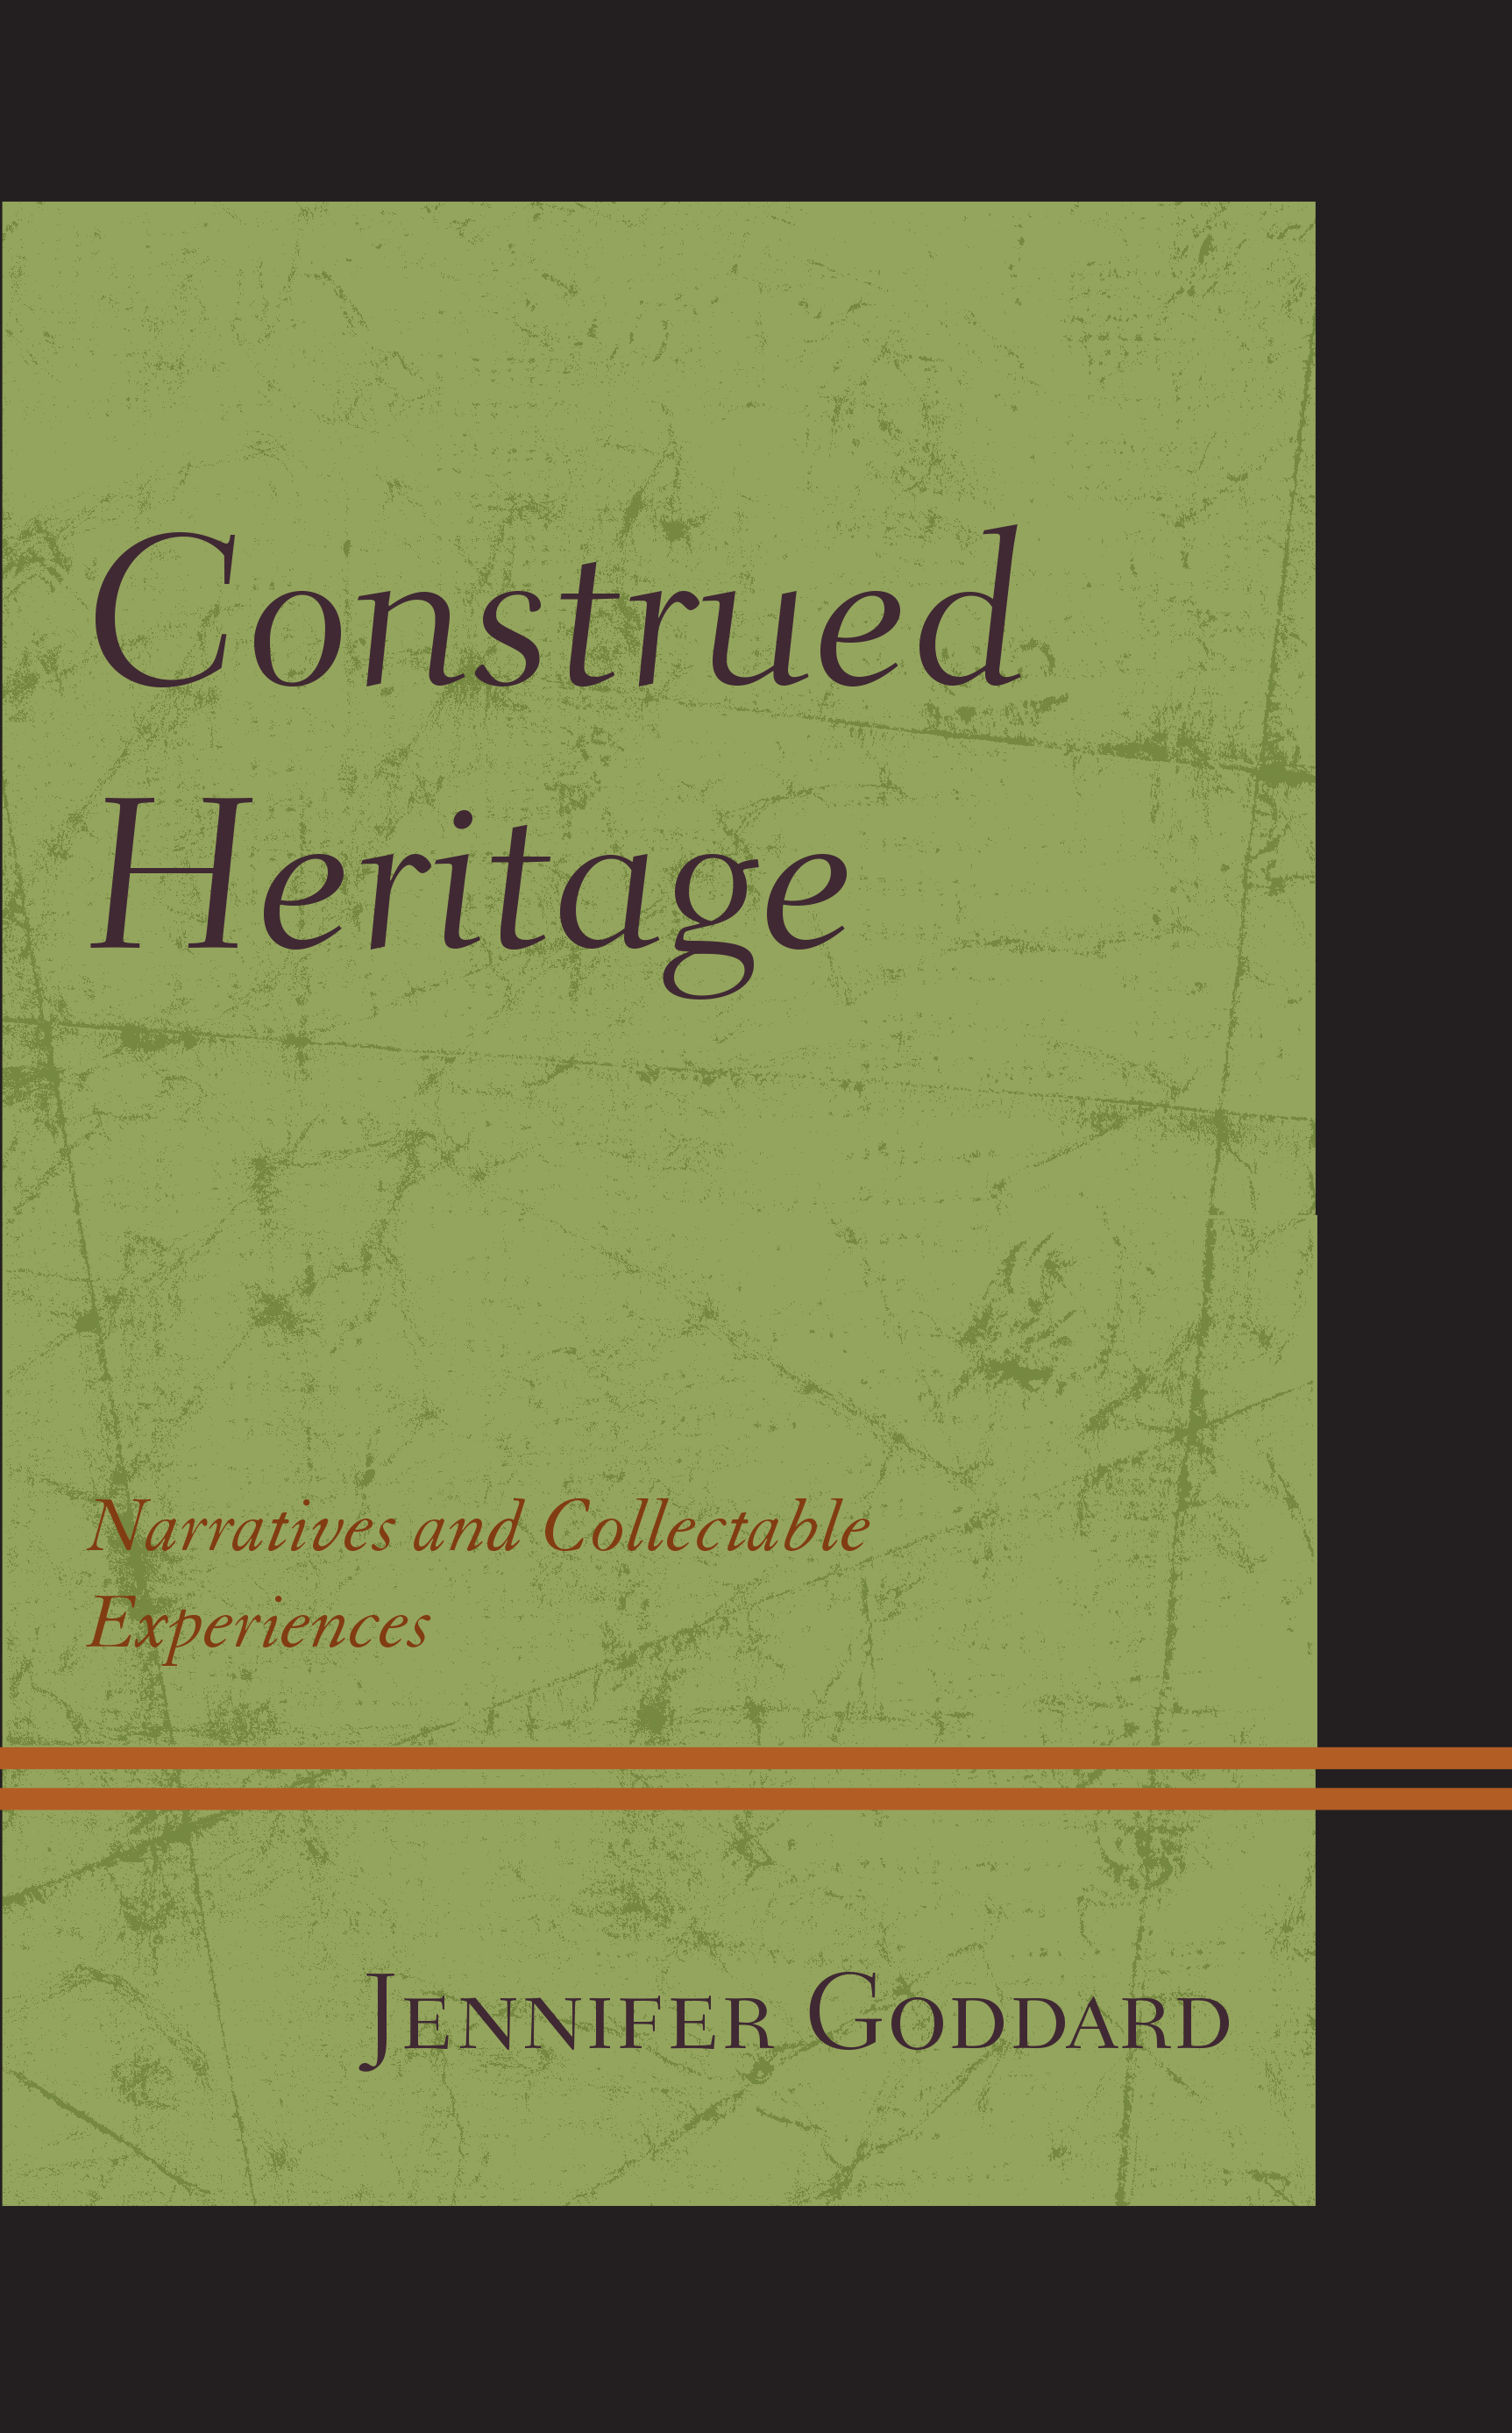 Construed Heritage: Narratives and Collectable Experiences